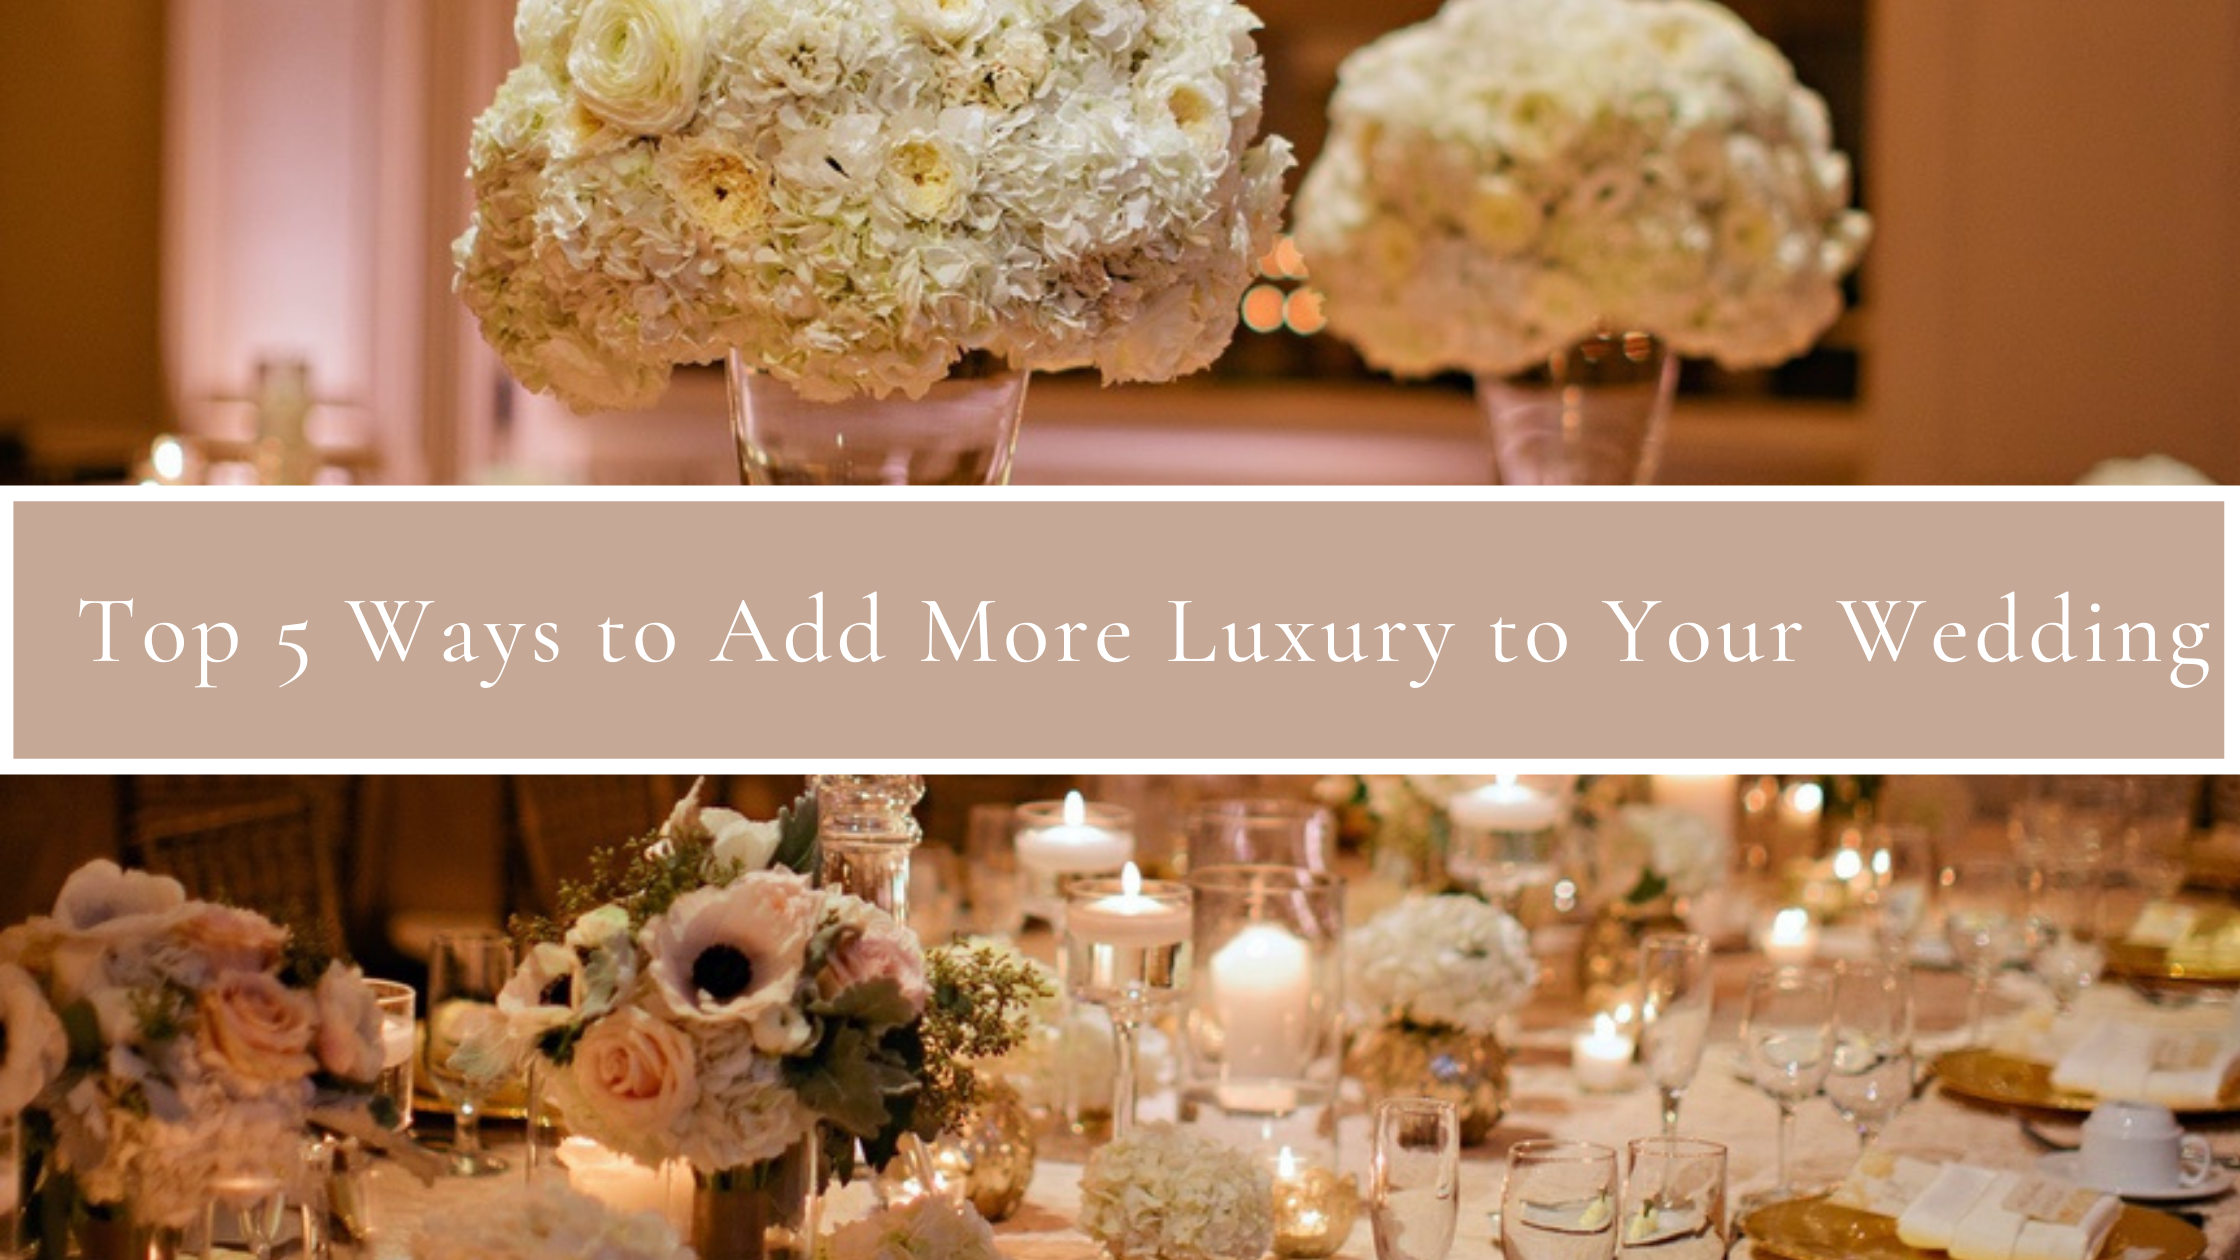 Top 5 Ways to Add More Luxury to Your Wedding